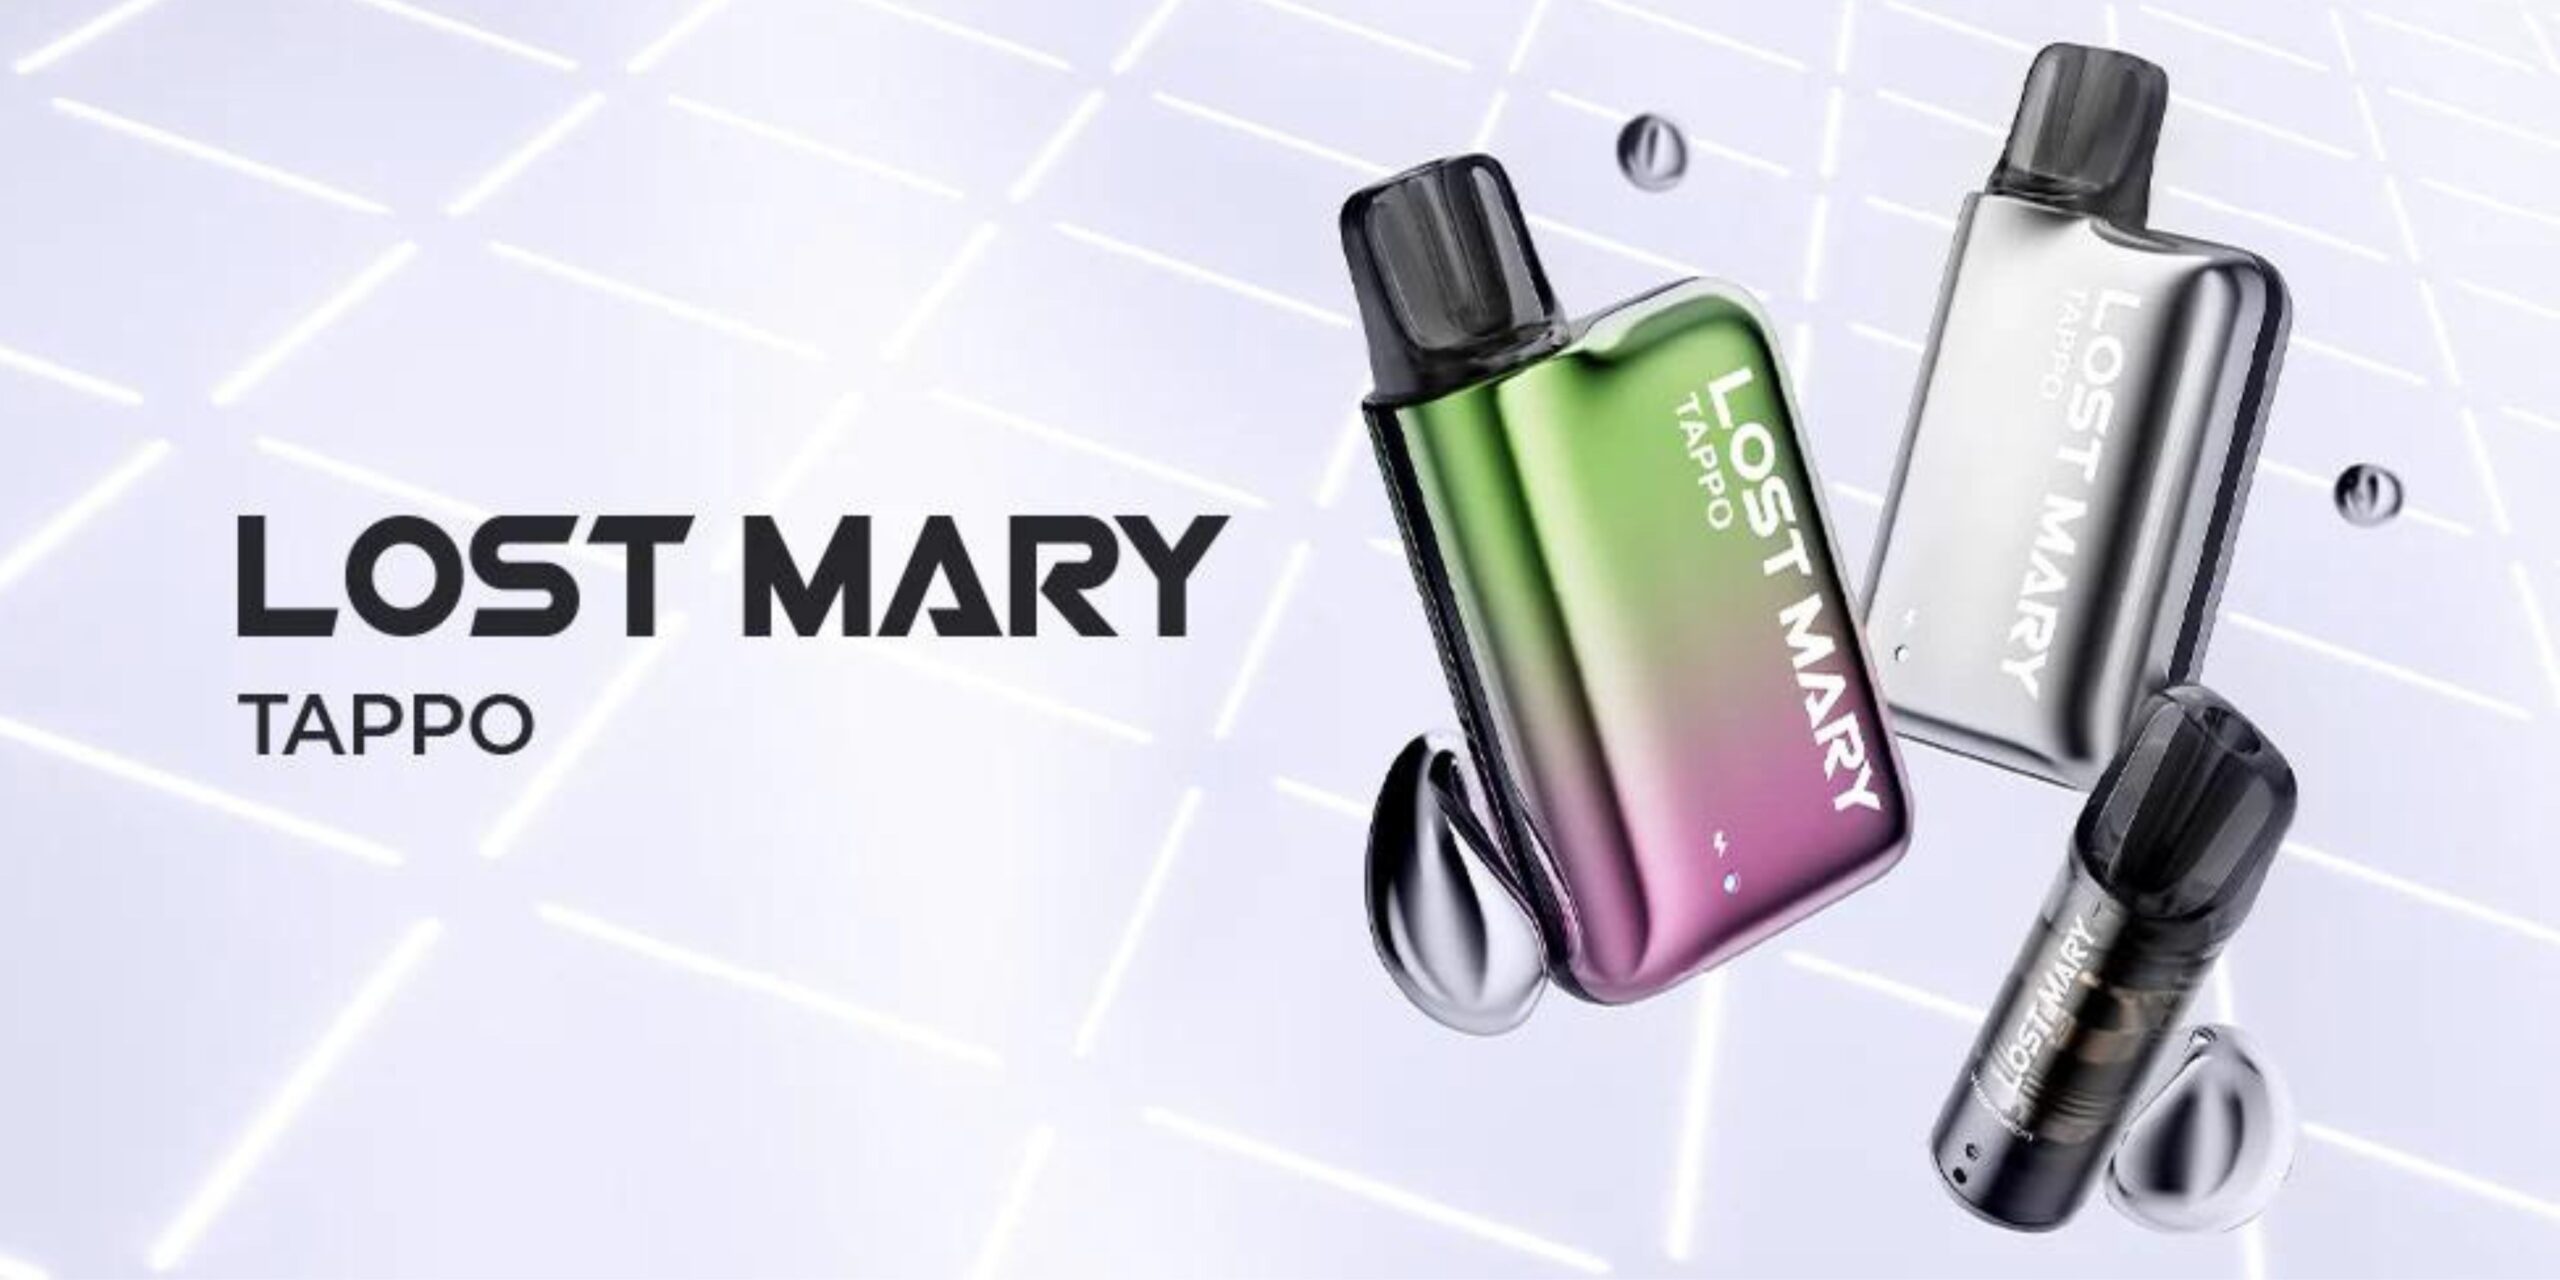 LOST MARY TAPPO – Tropical Fruit (Replacement Prefilled Pods) VAPING - XMANIA Ireland 15